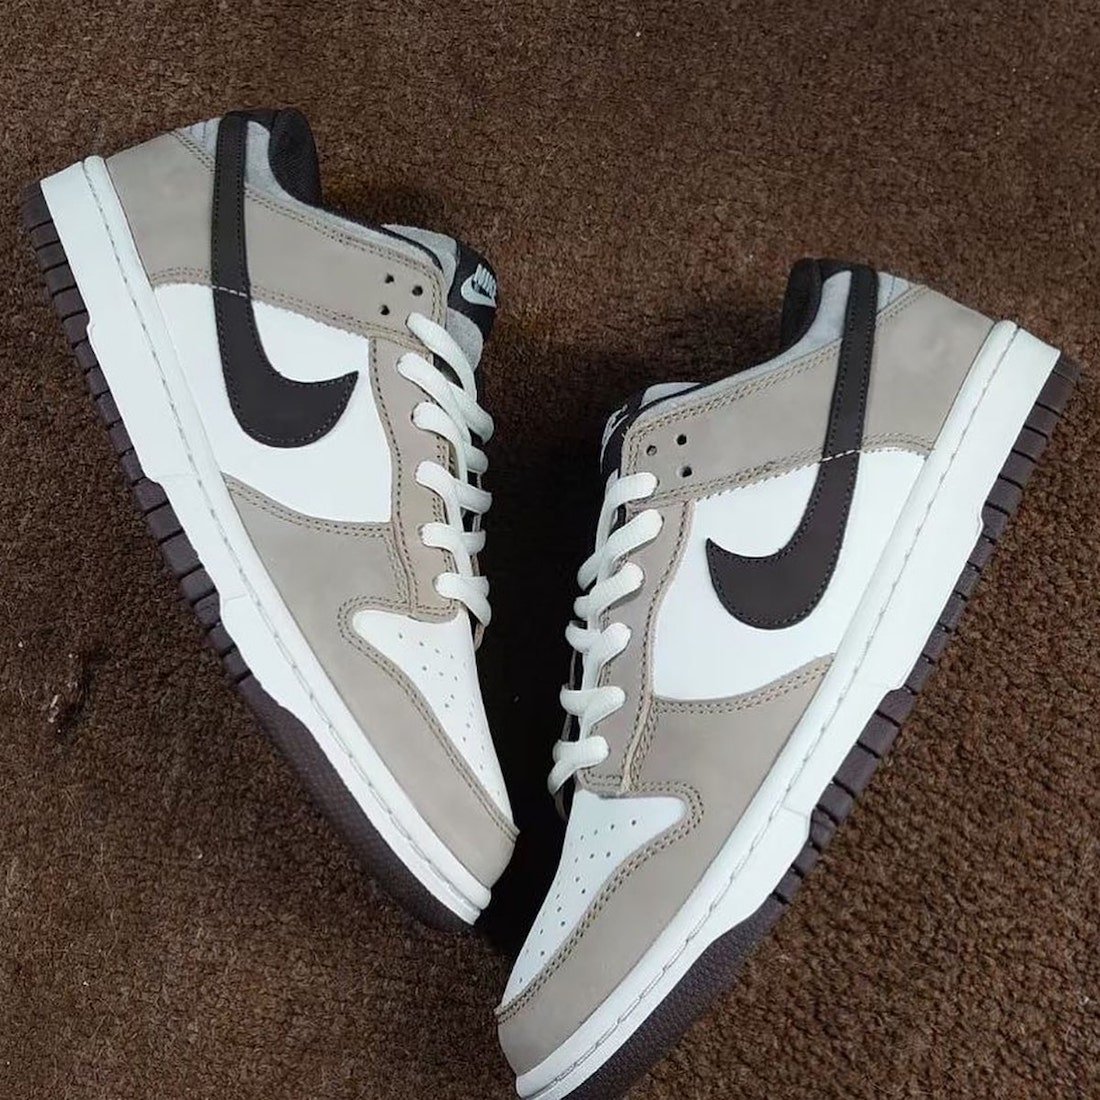 Nike Dunk Low White Grey Brown Release Date Info